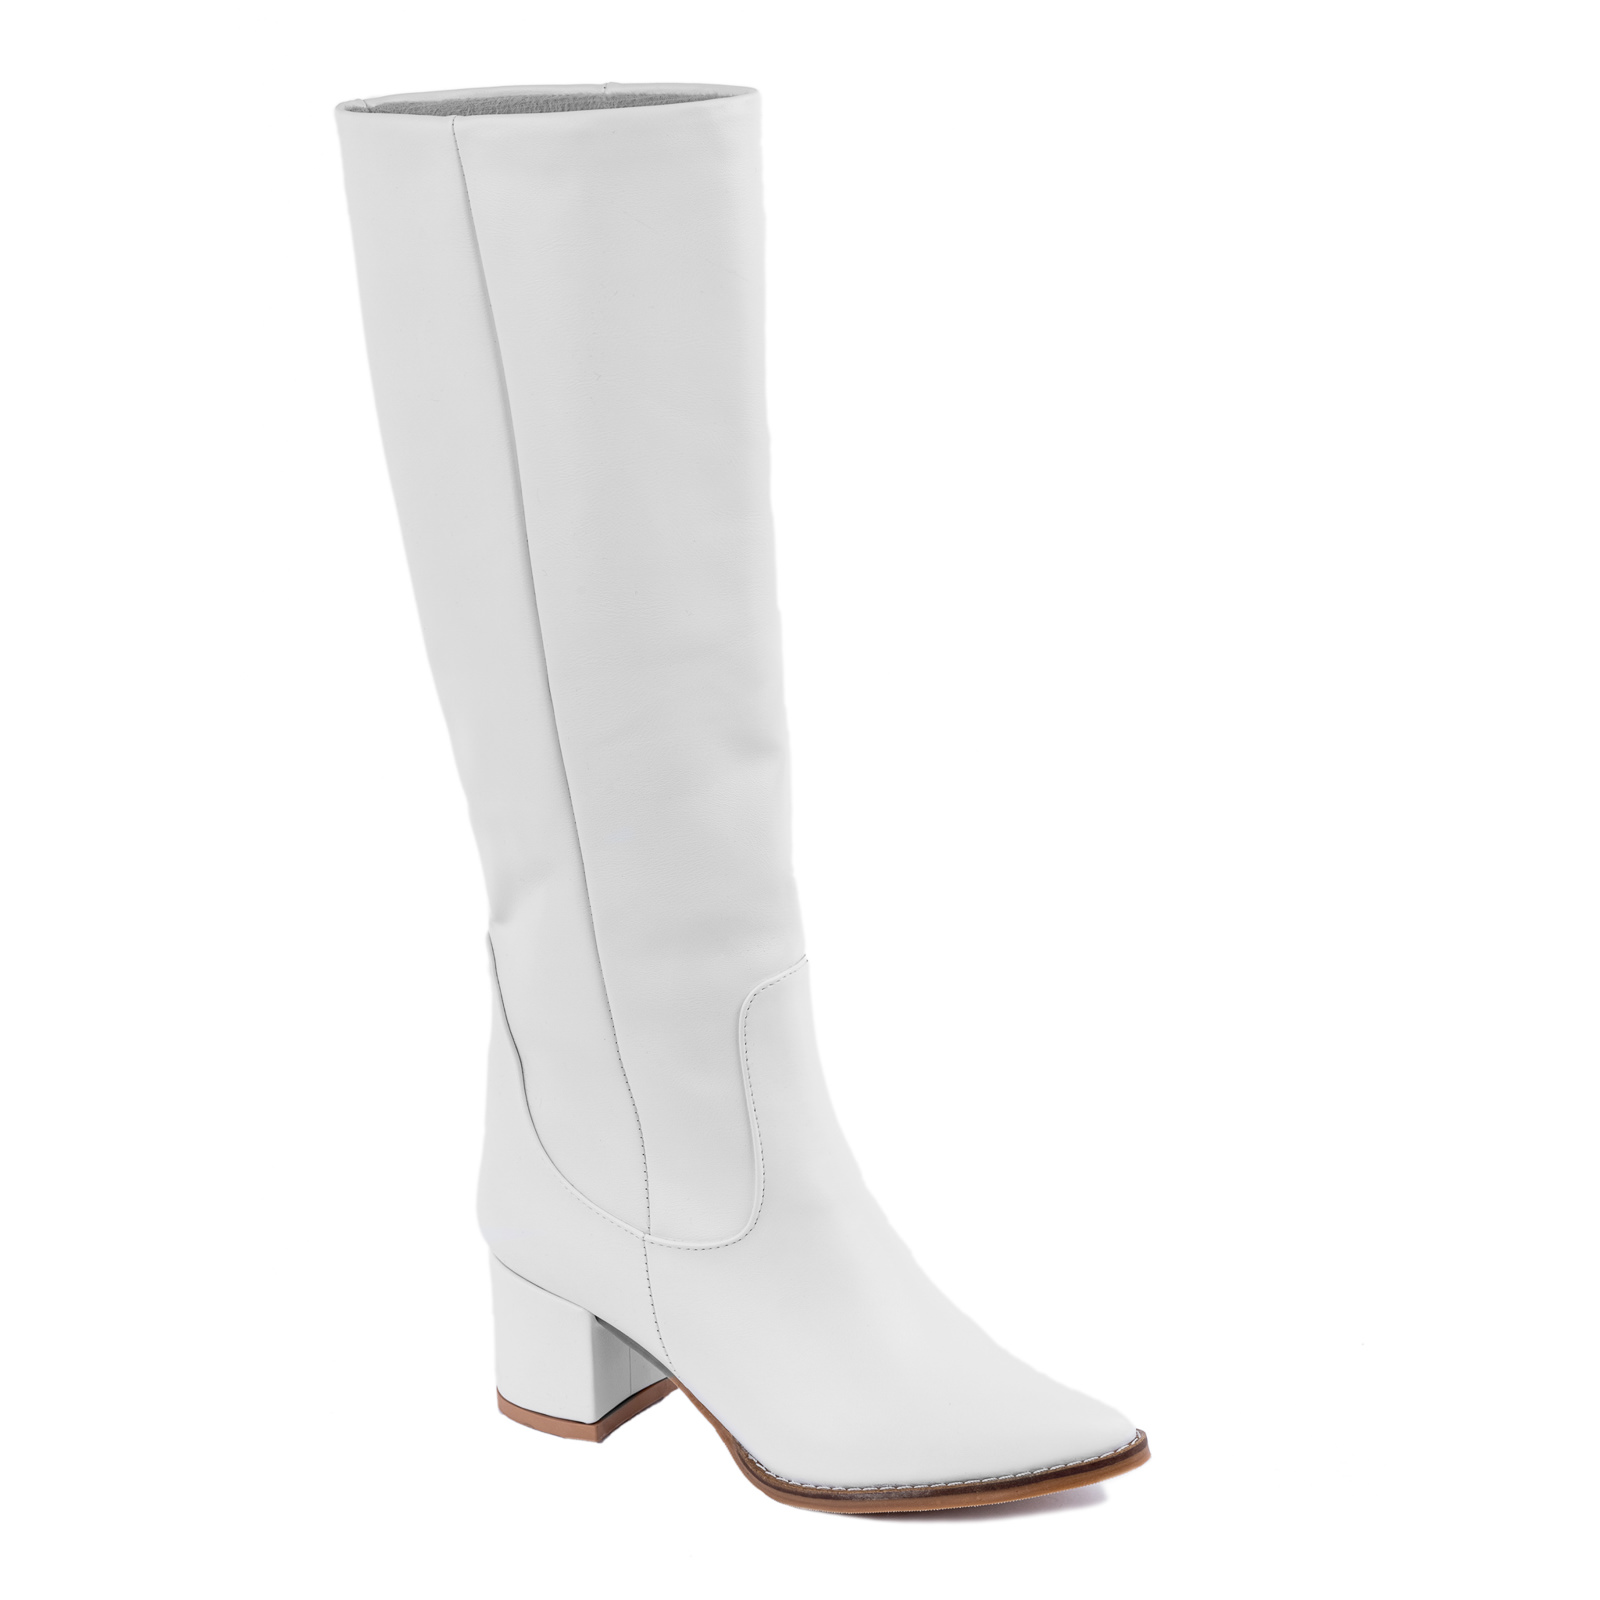 HIGH BOOTS WITH BLOCK HEEL - WHITE